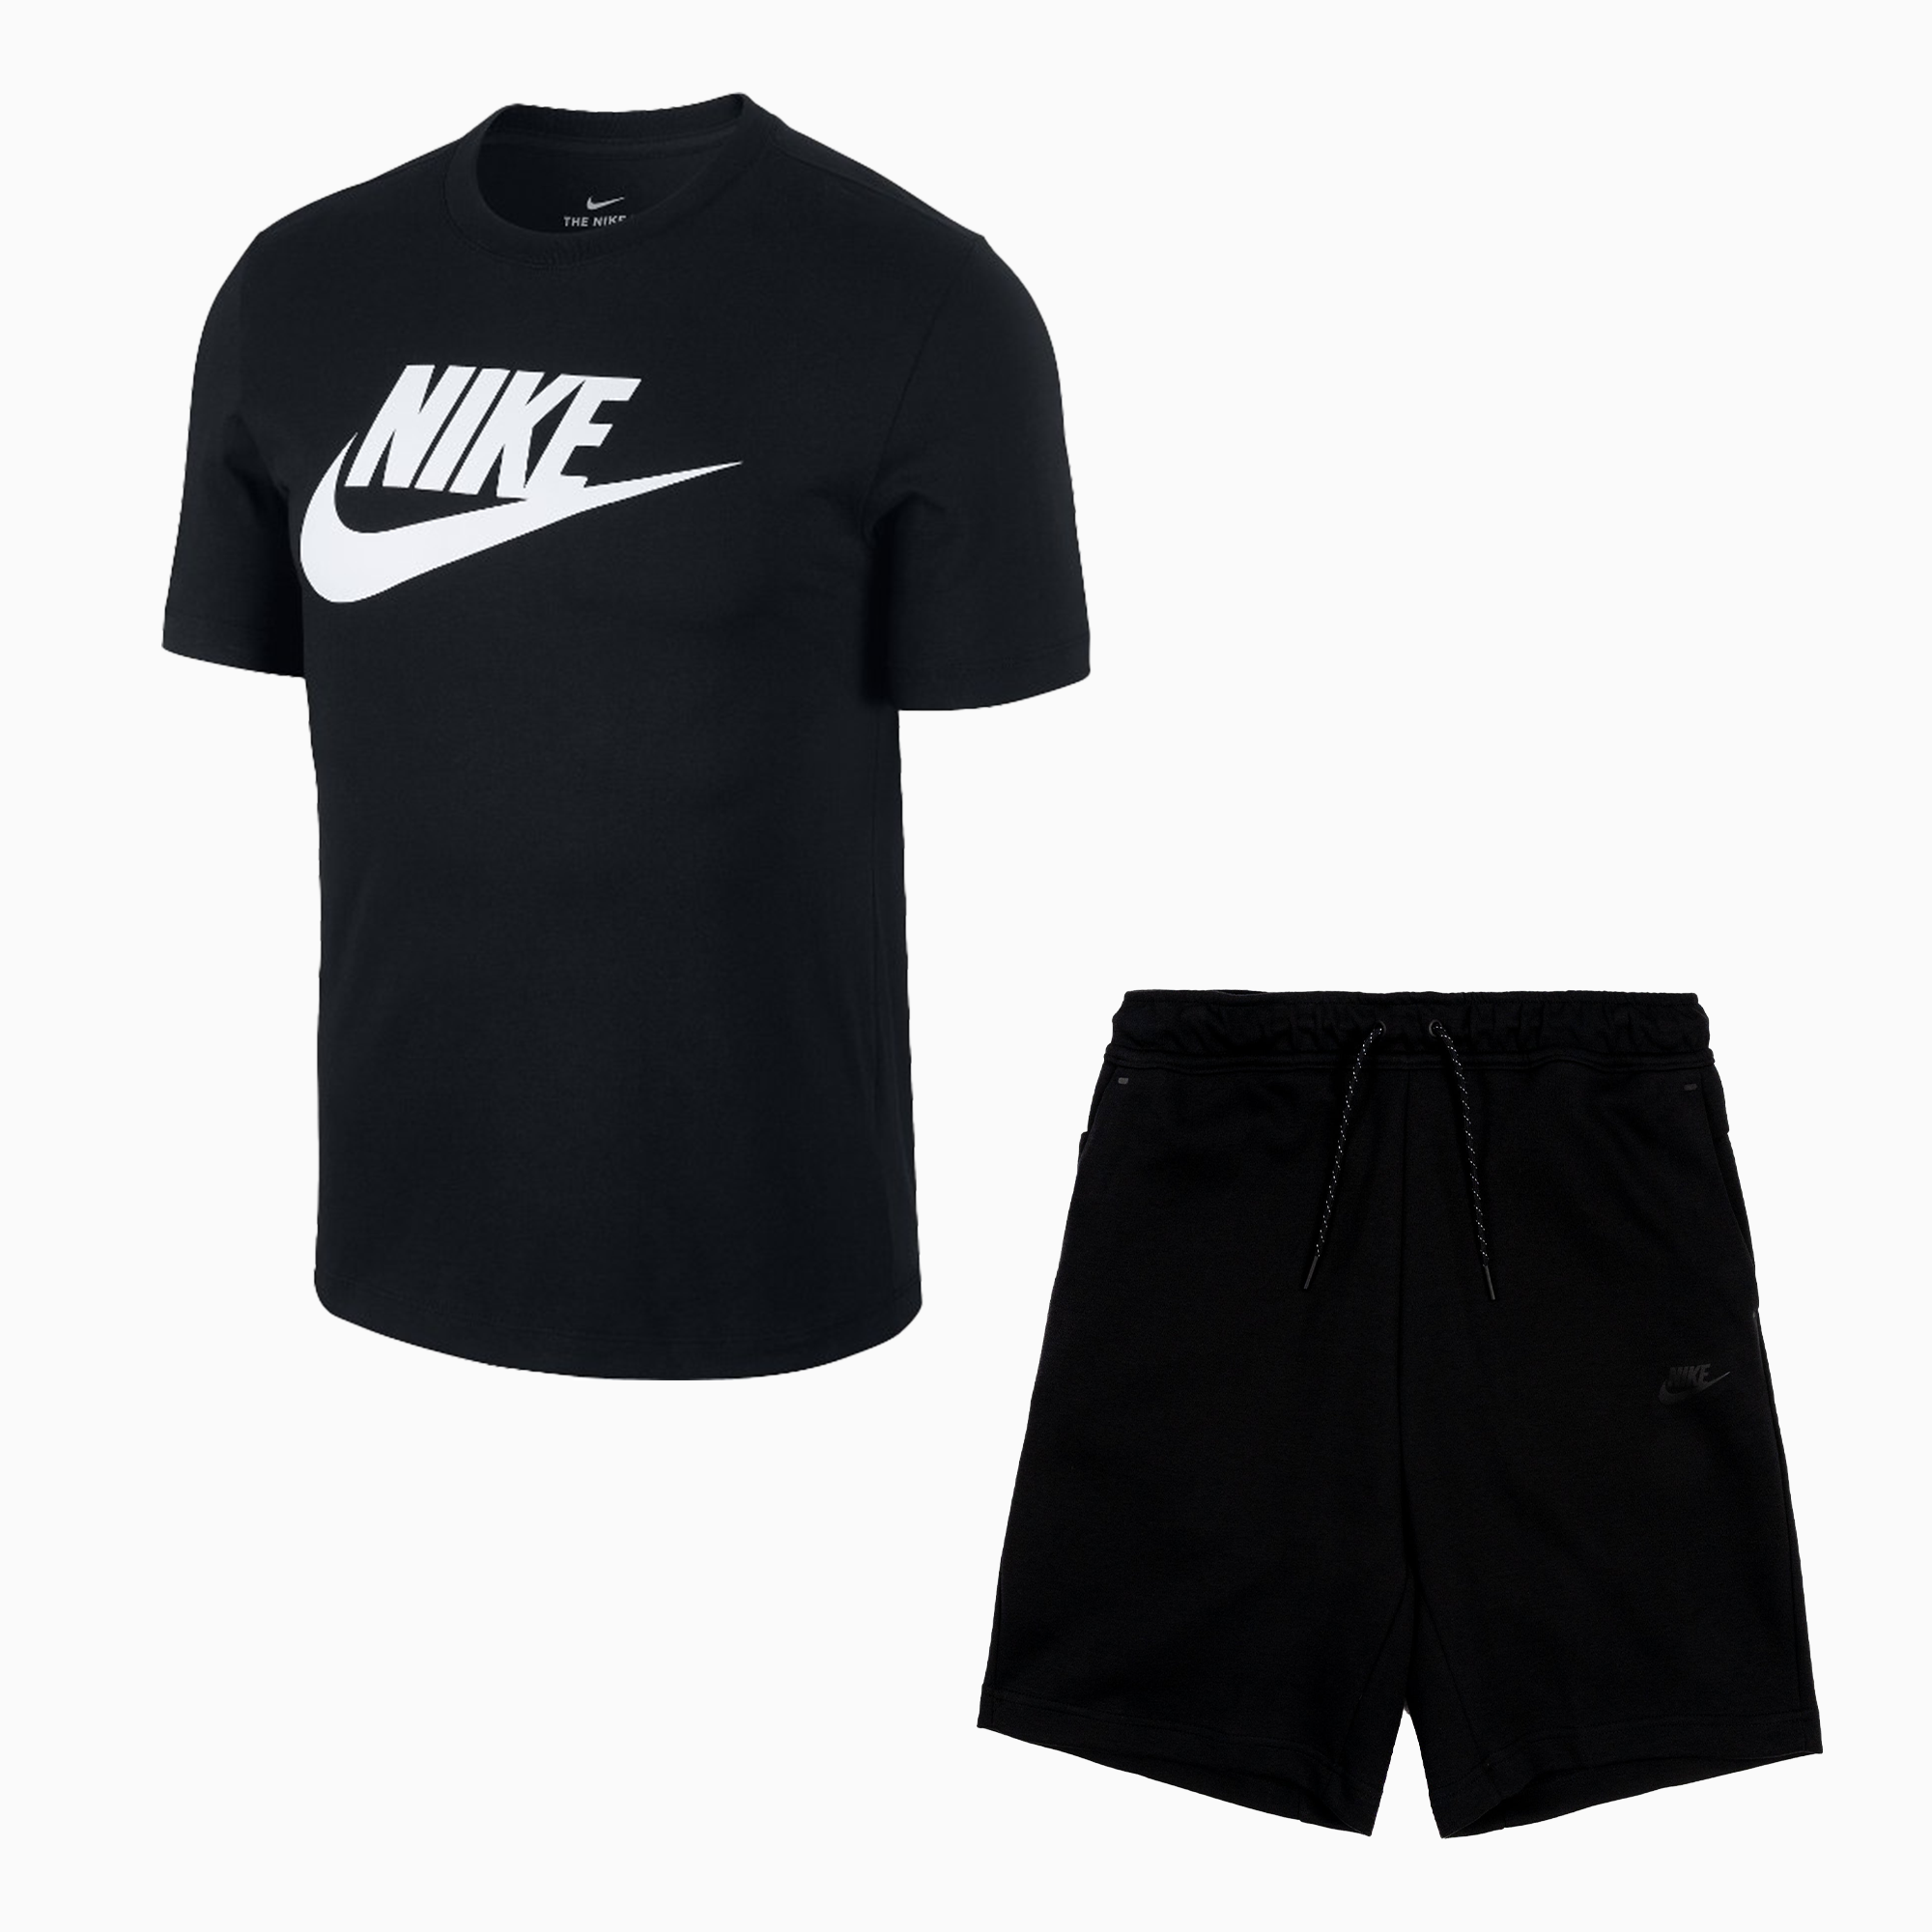 nike-mens-sportswear-t-shirt-and-shorts-outfit-ar5004-010-cu4503-010